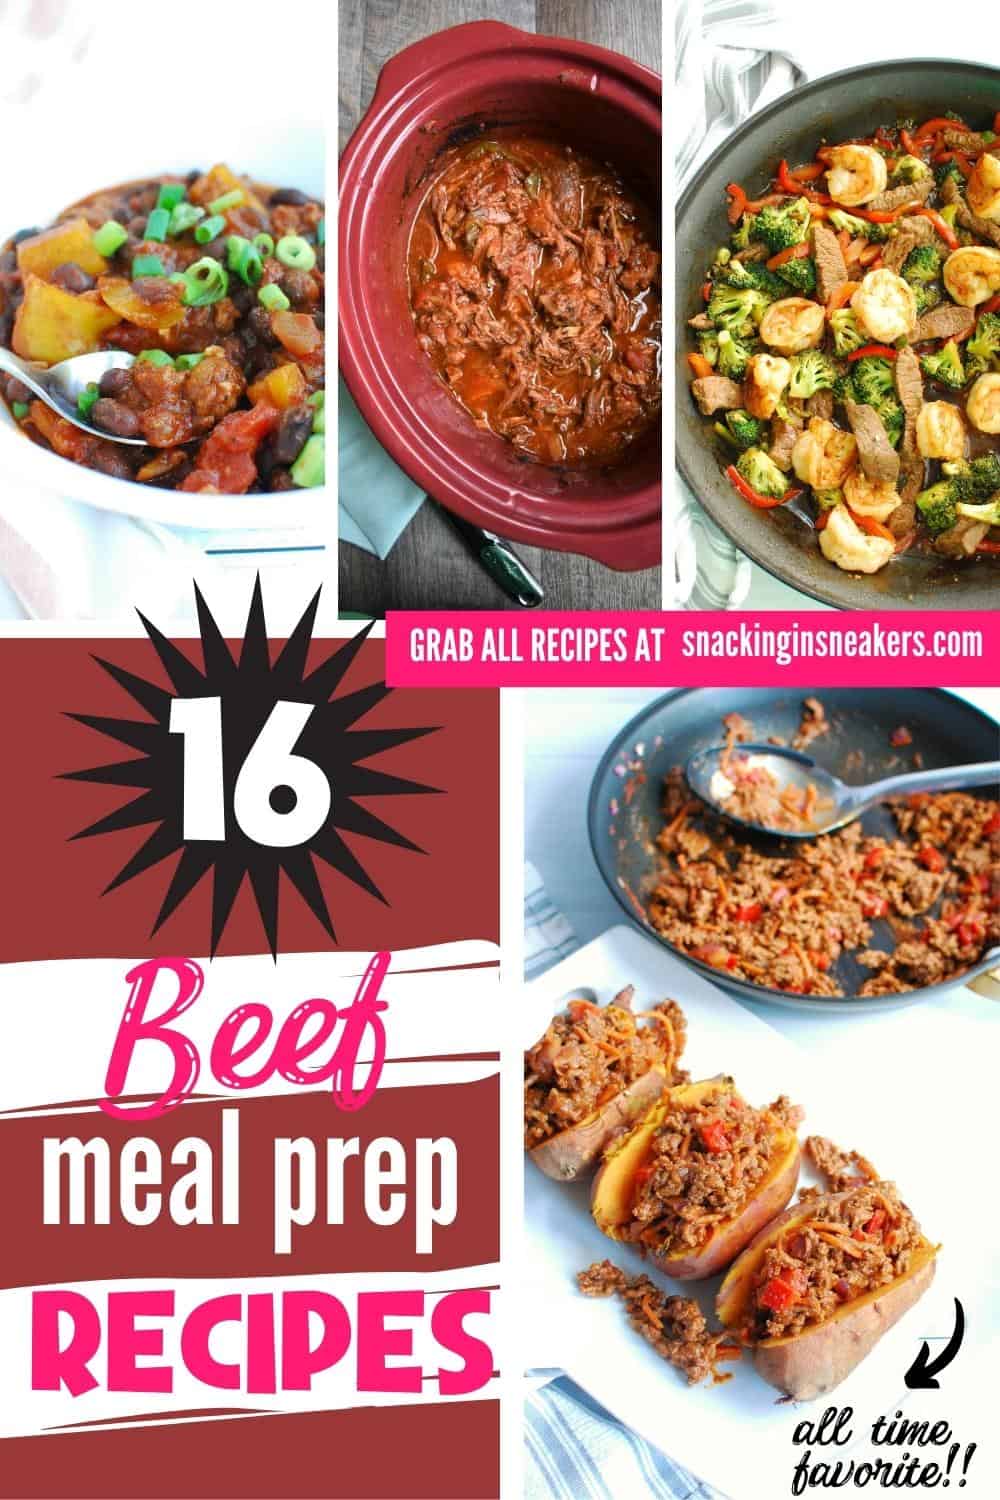 A collage of several beef meal prep recipes with a text overlay for Pinterest.